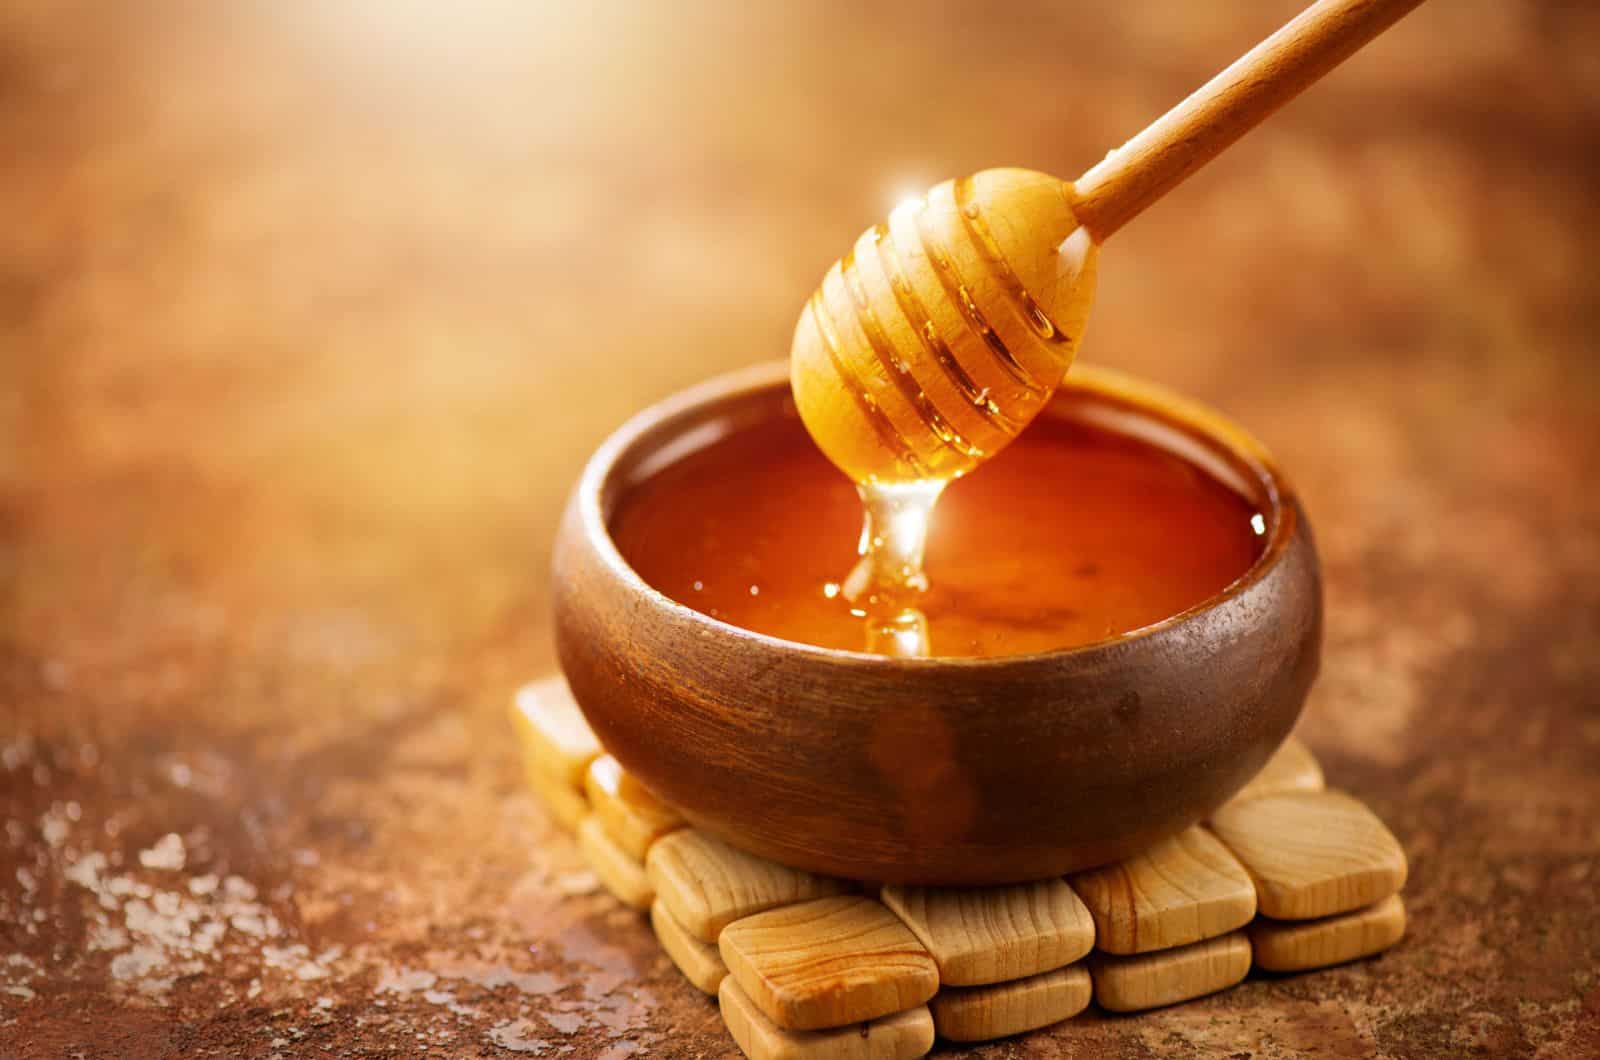 Honey dripping from honey dipper in wooden bowl